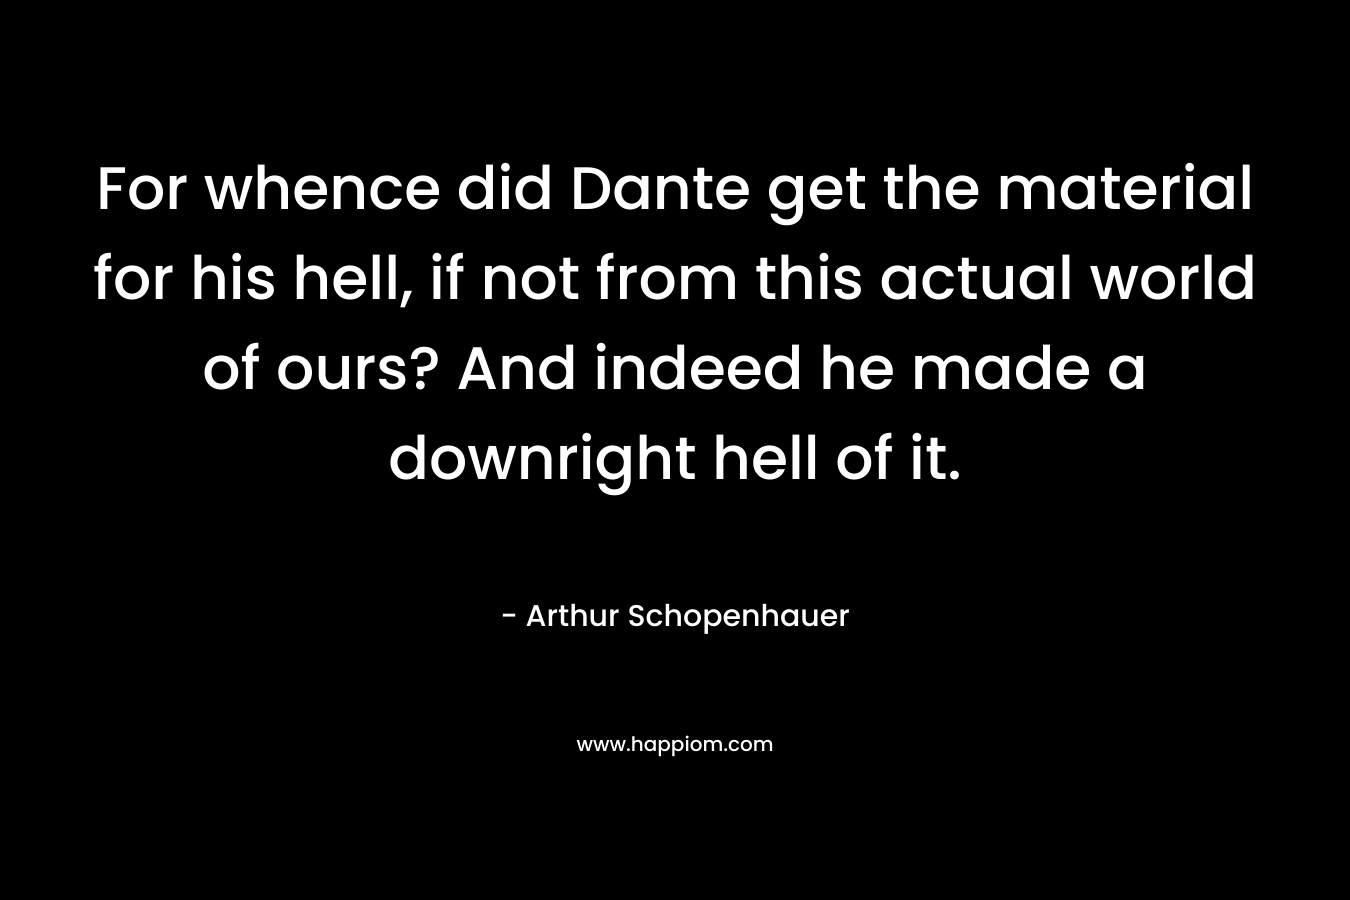 For whence did Dante get the material for his hell, if not from this actual world of ours? And indeed he made a downright hell of it. – Arthur Schopenhauer